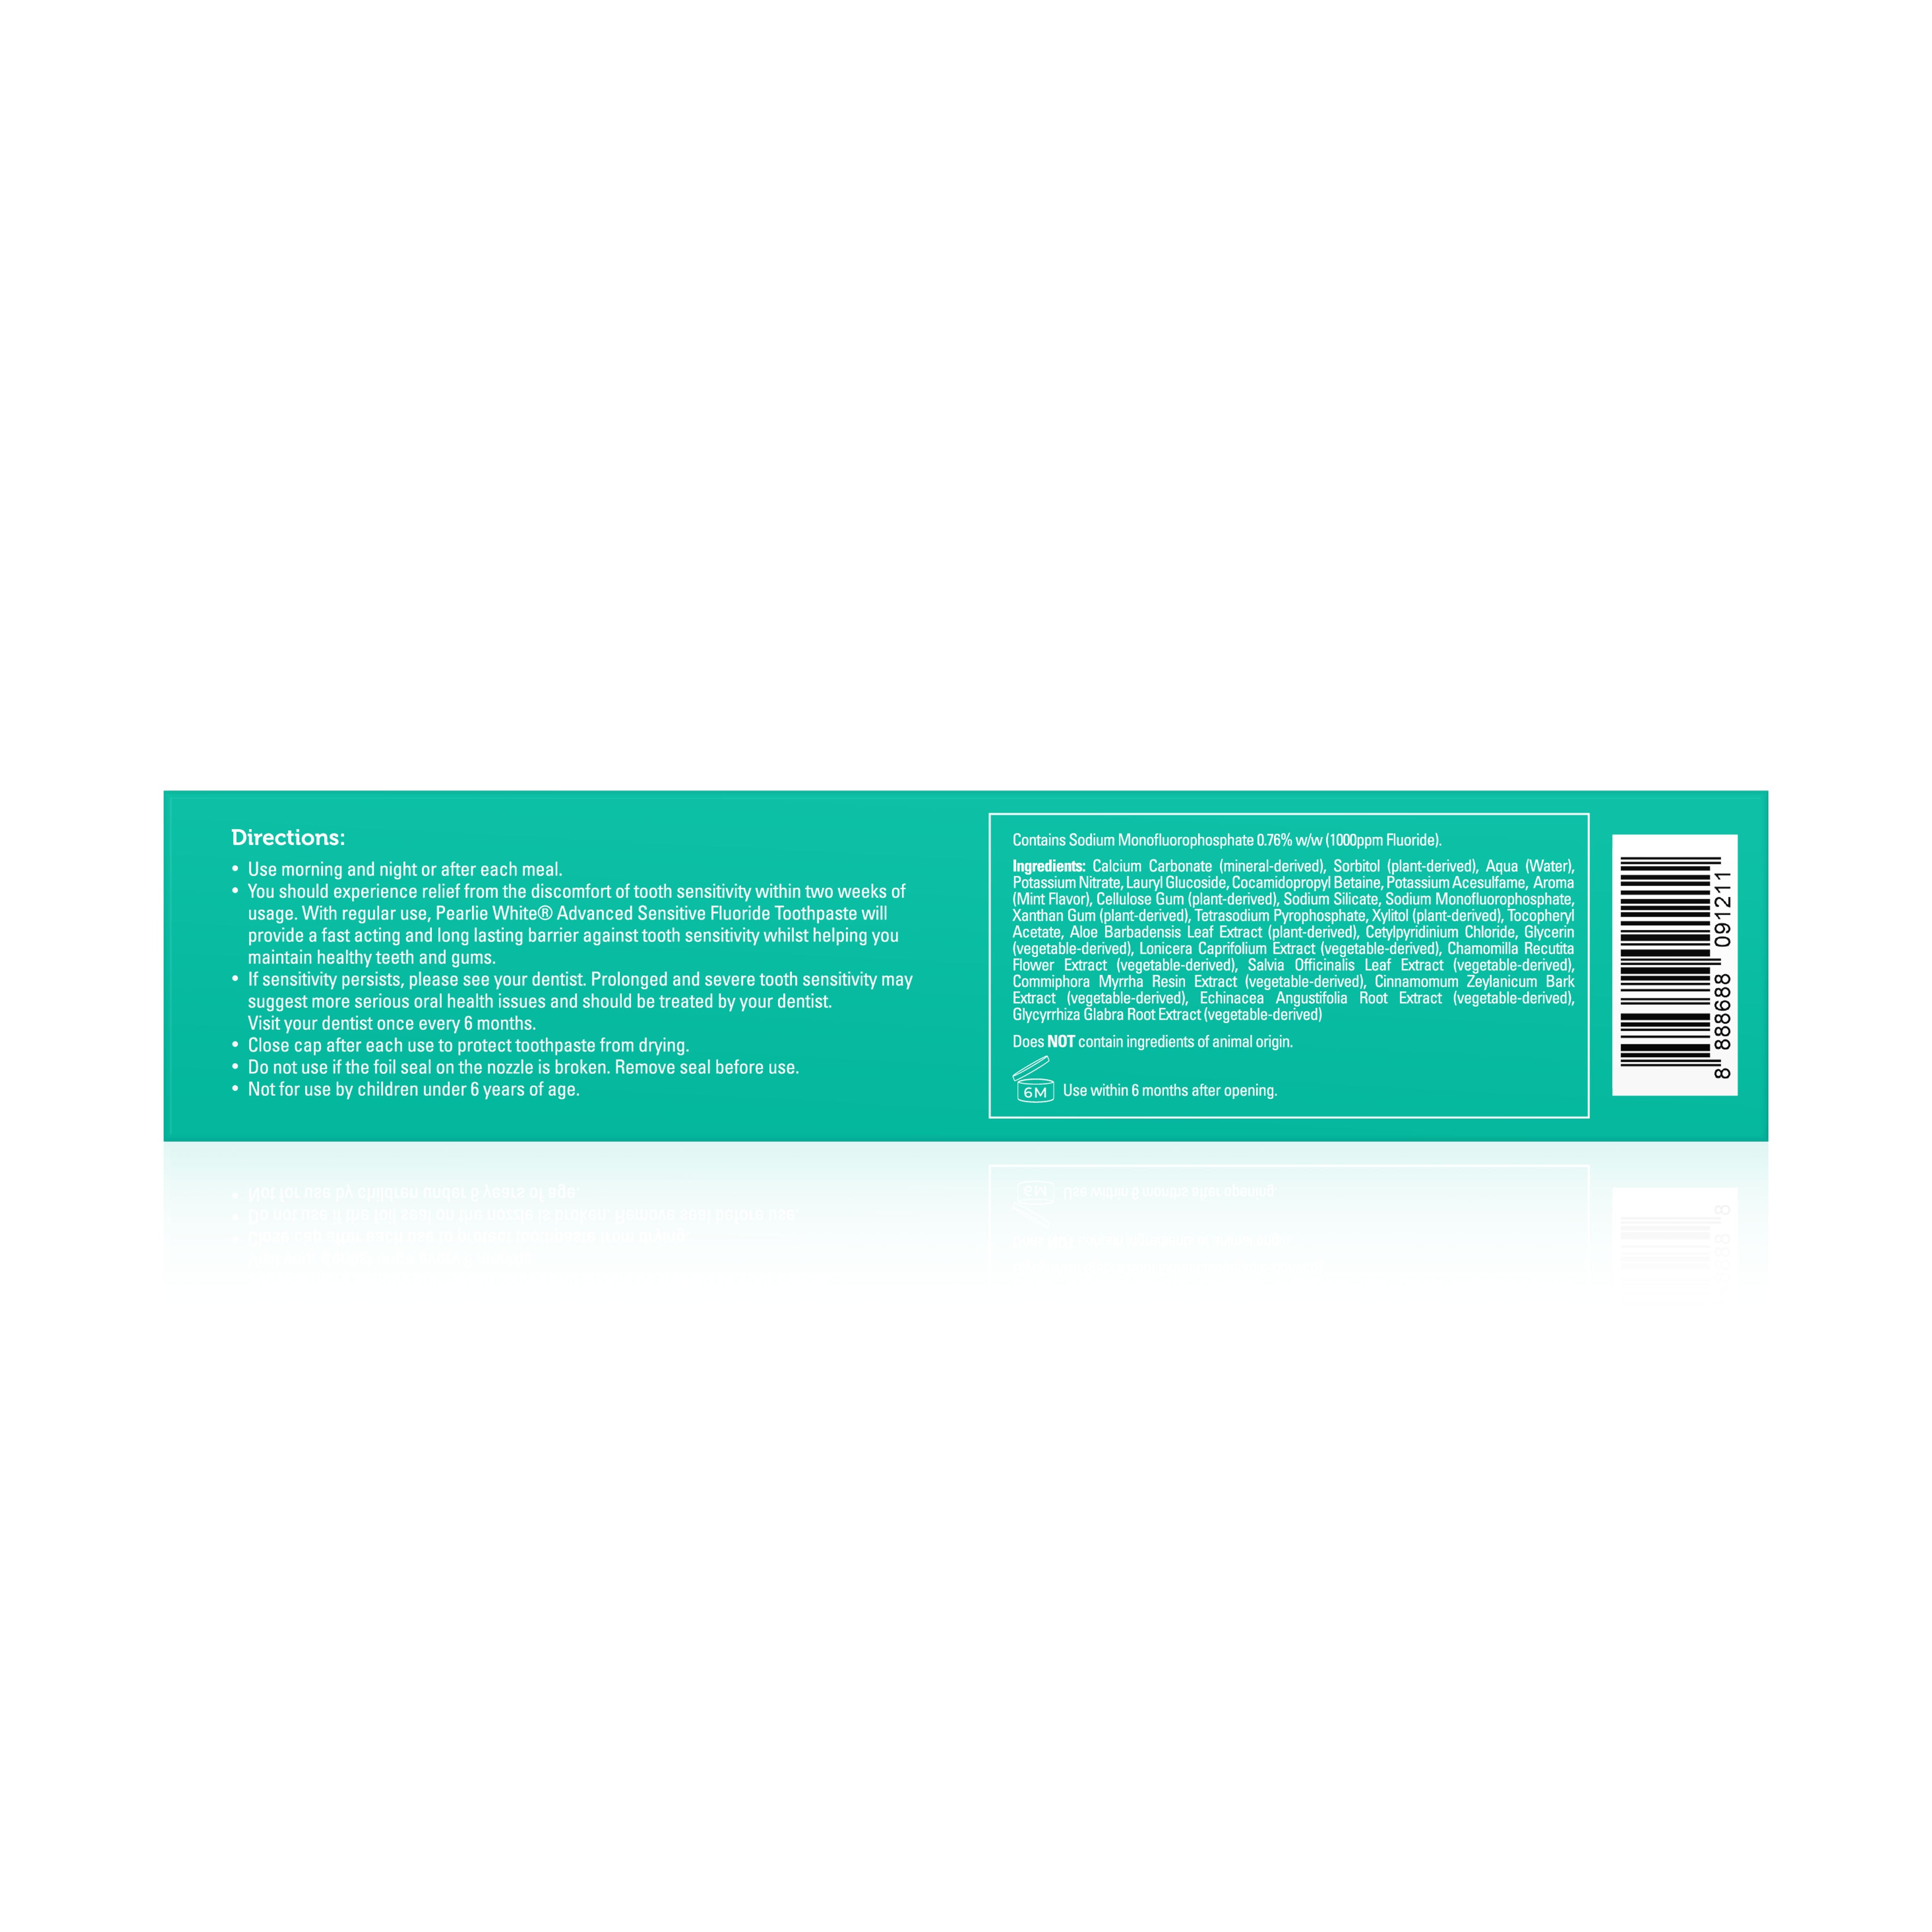 Advanced Sensitive Fluoride Toothpaste 130gm- Triple Pack